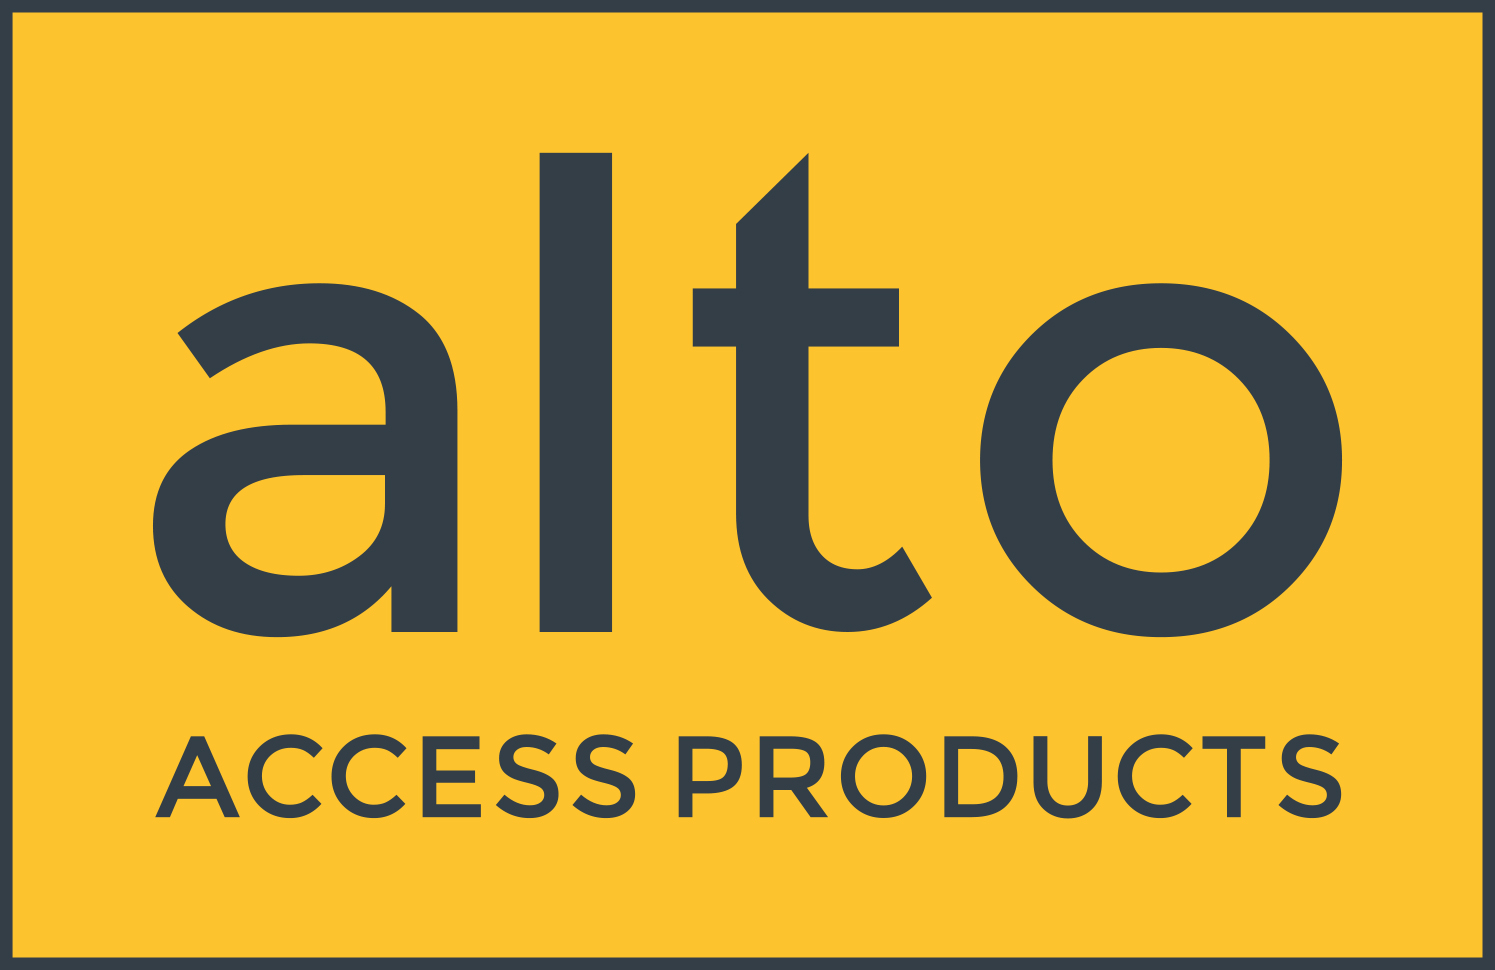 Alto Access Products